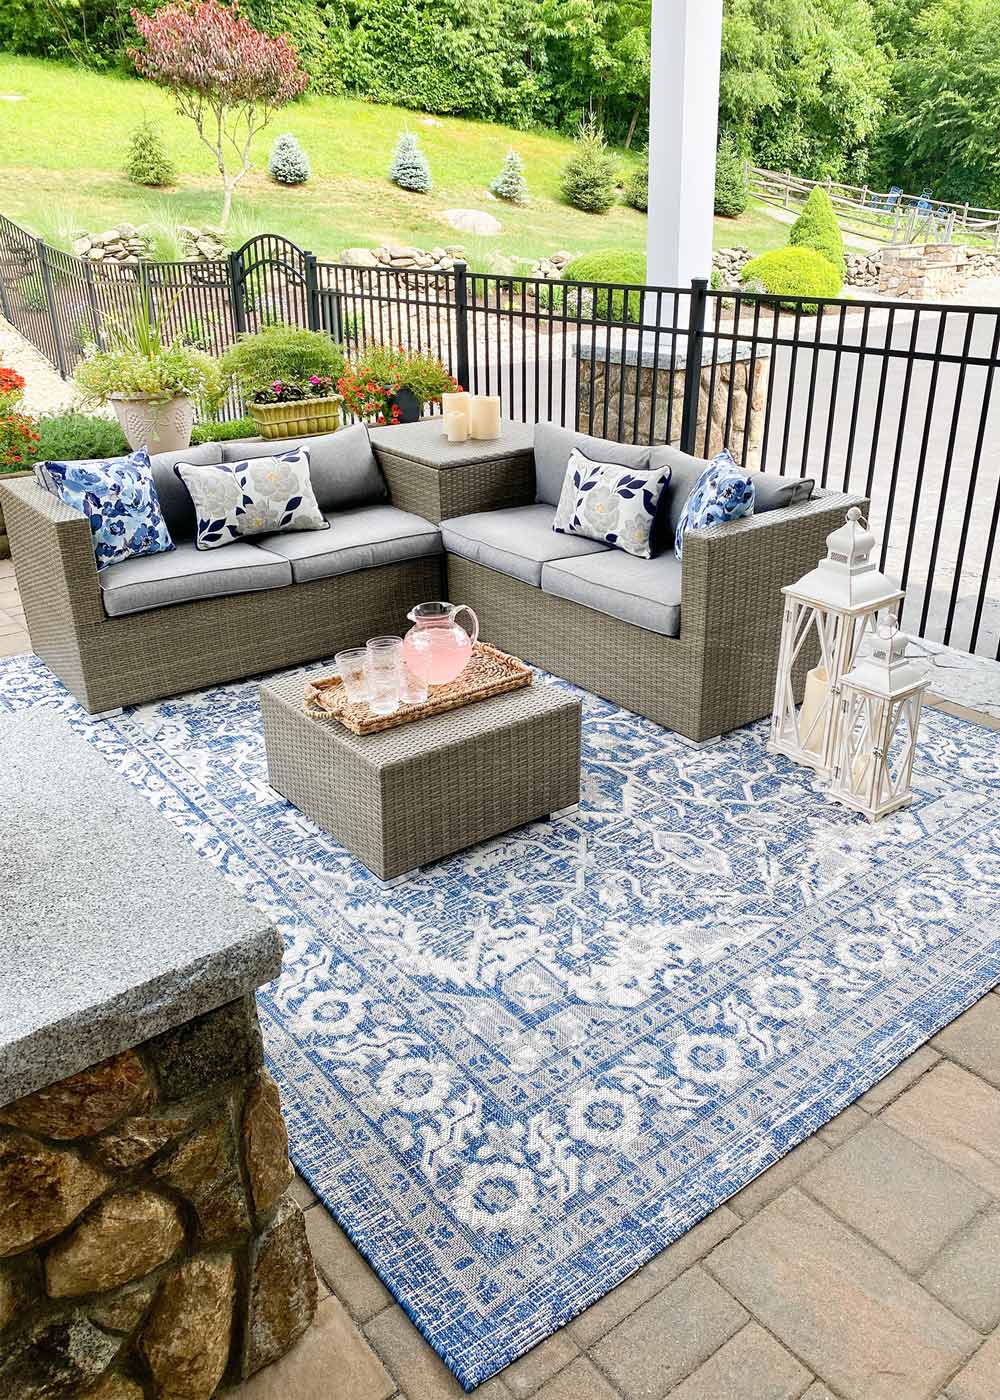 How to Style a Covered Patio - The Home Depot